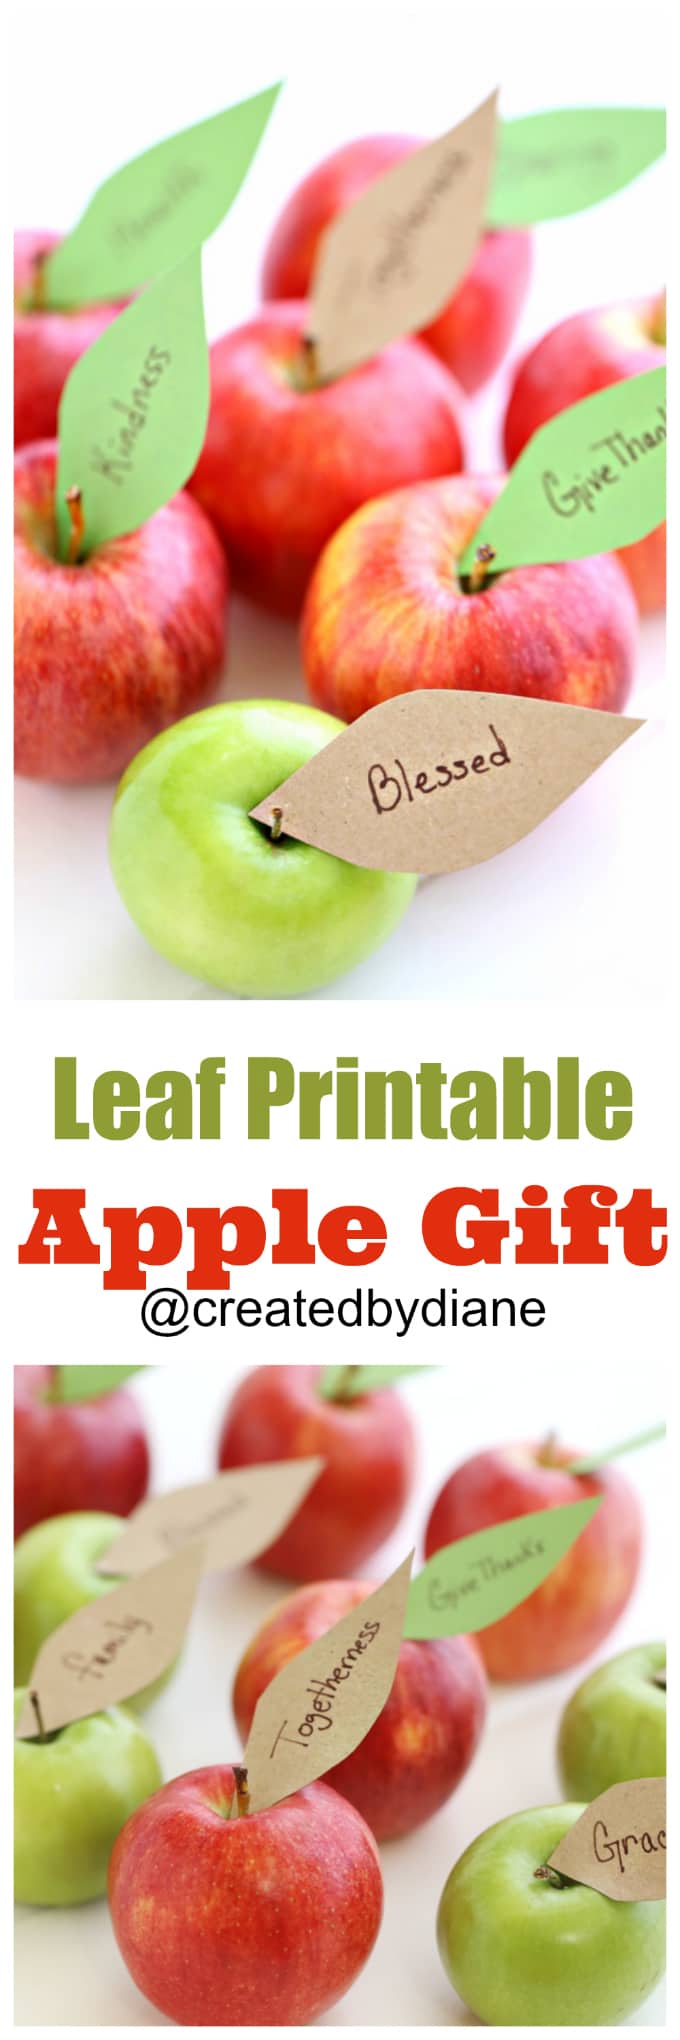 leaf-printable-apple-gift-createdbydiane-thanksgiving-place-cards-teacher-gift-food-gift